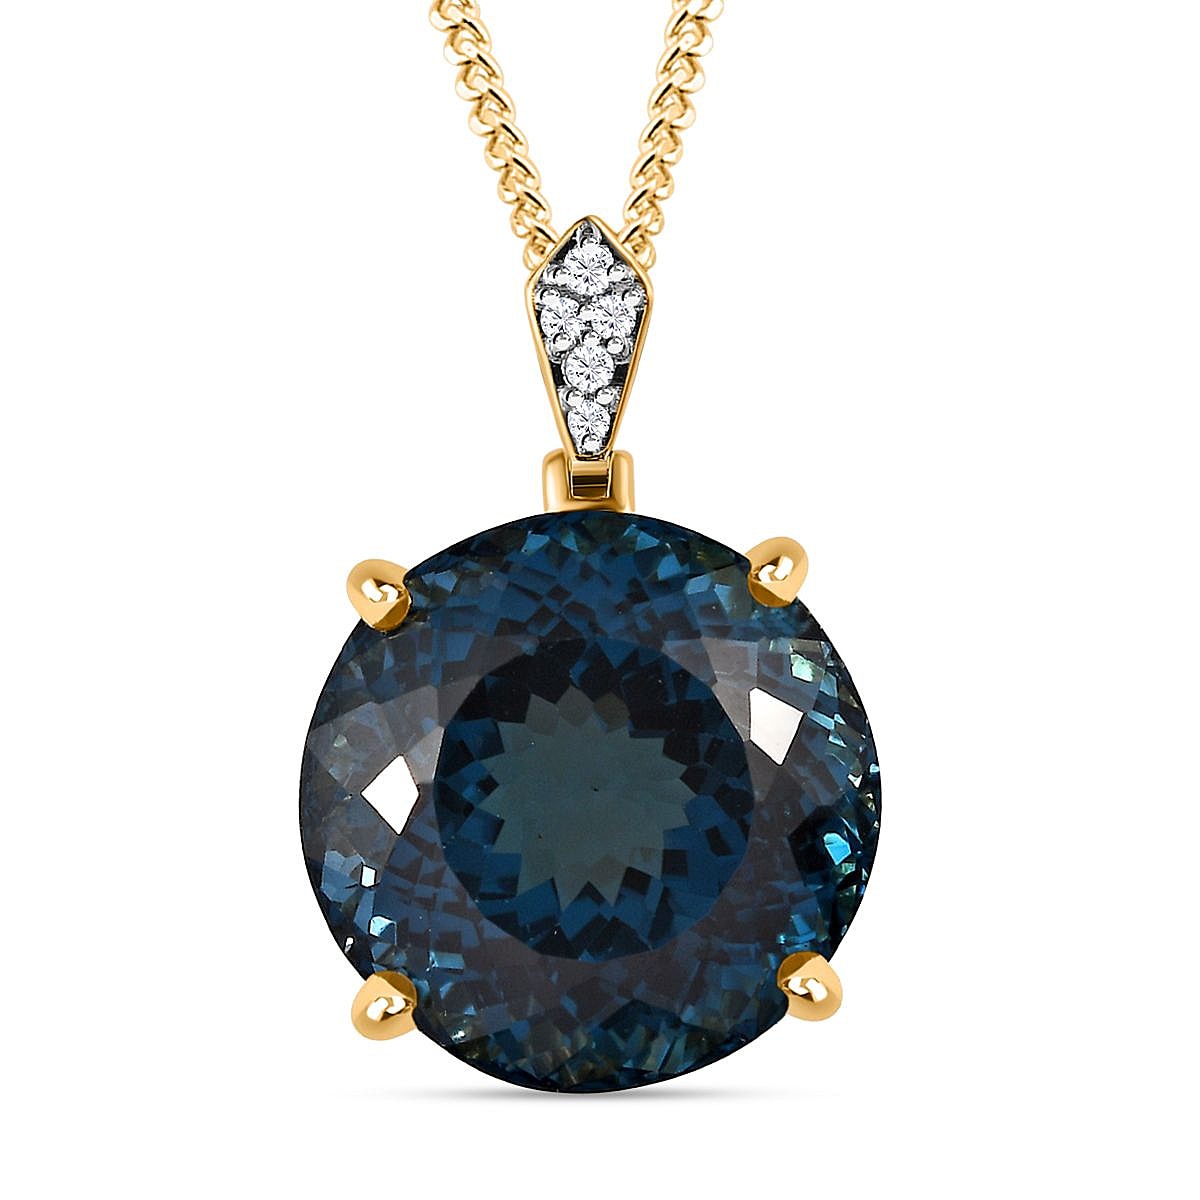 London Blue Topaz, White Zircon Pendant with Chain (Size 20) in